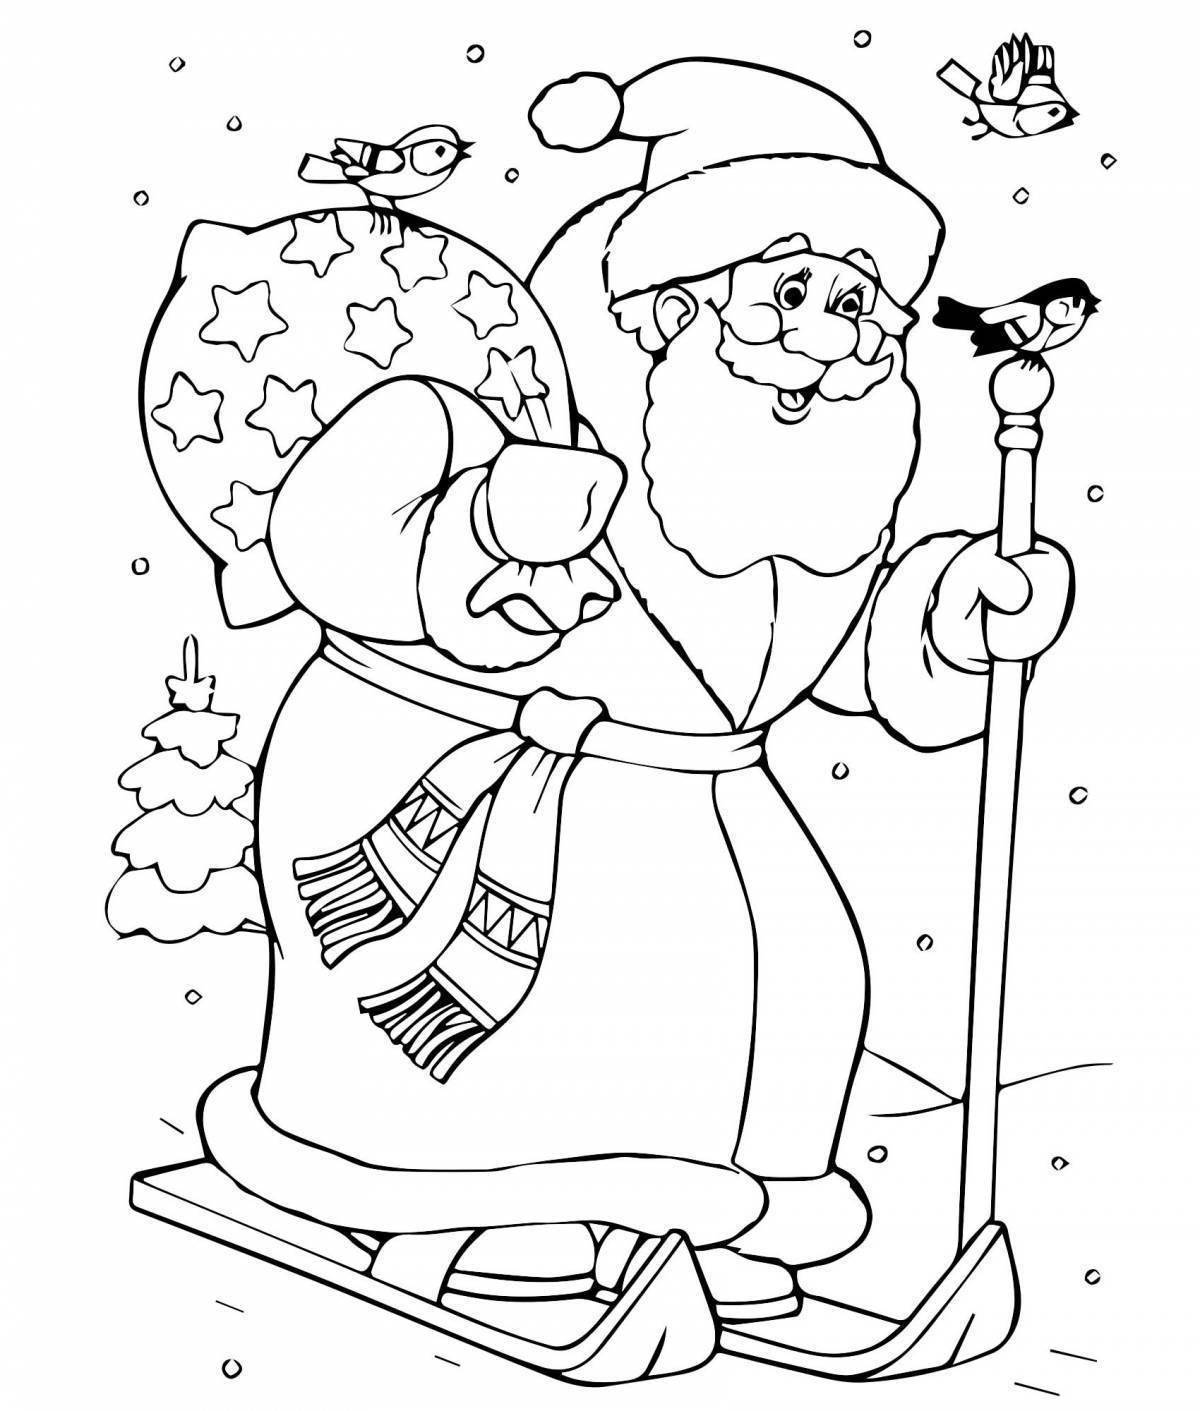 Fairy coloring santa claus for kids